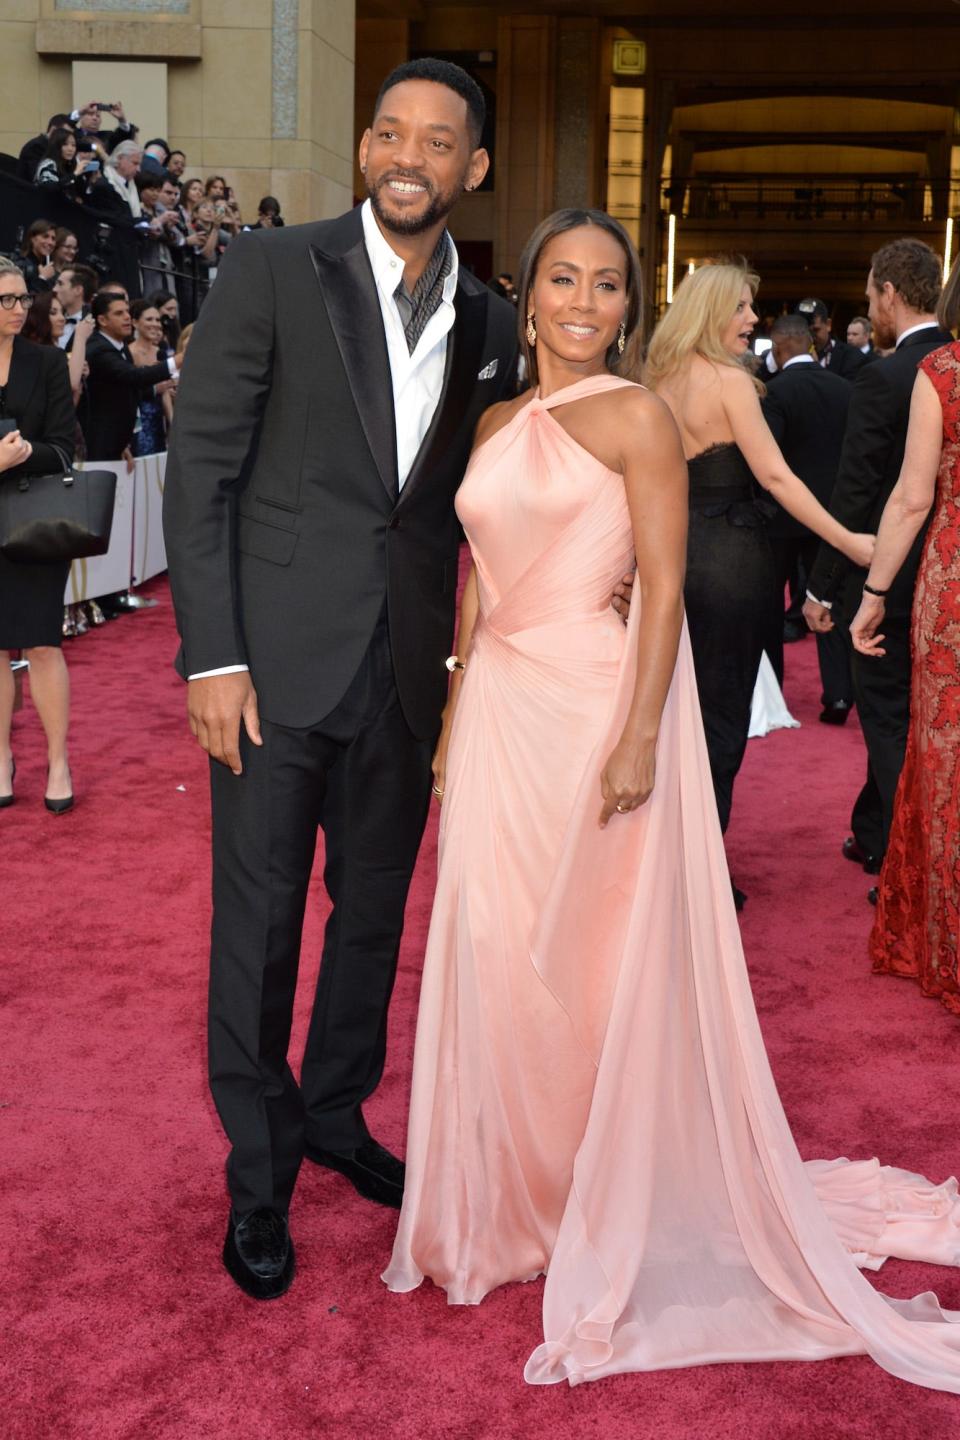 Will Smith and Jada Pinkett Smith at the Oscars on March 1, 2014.